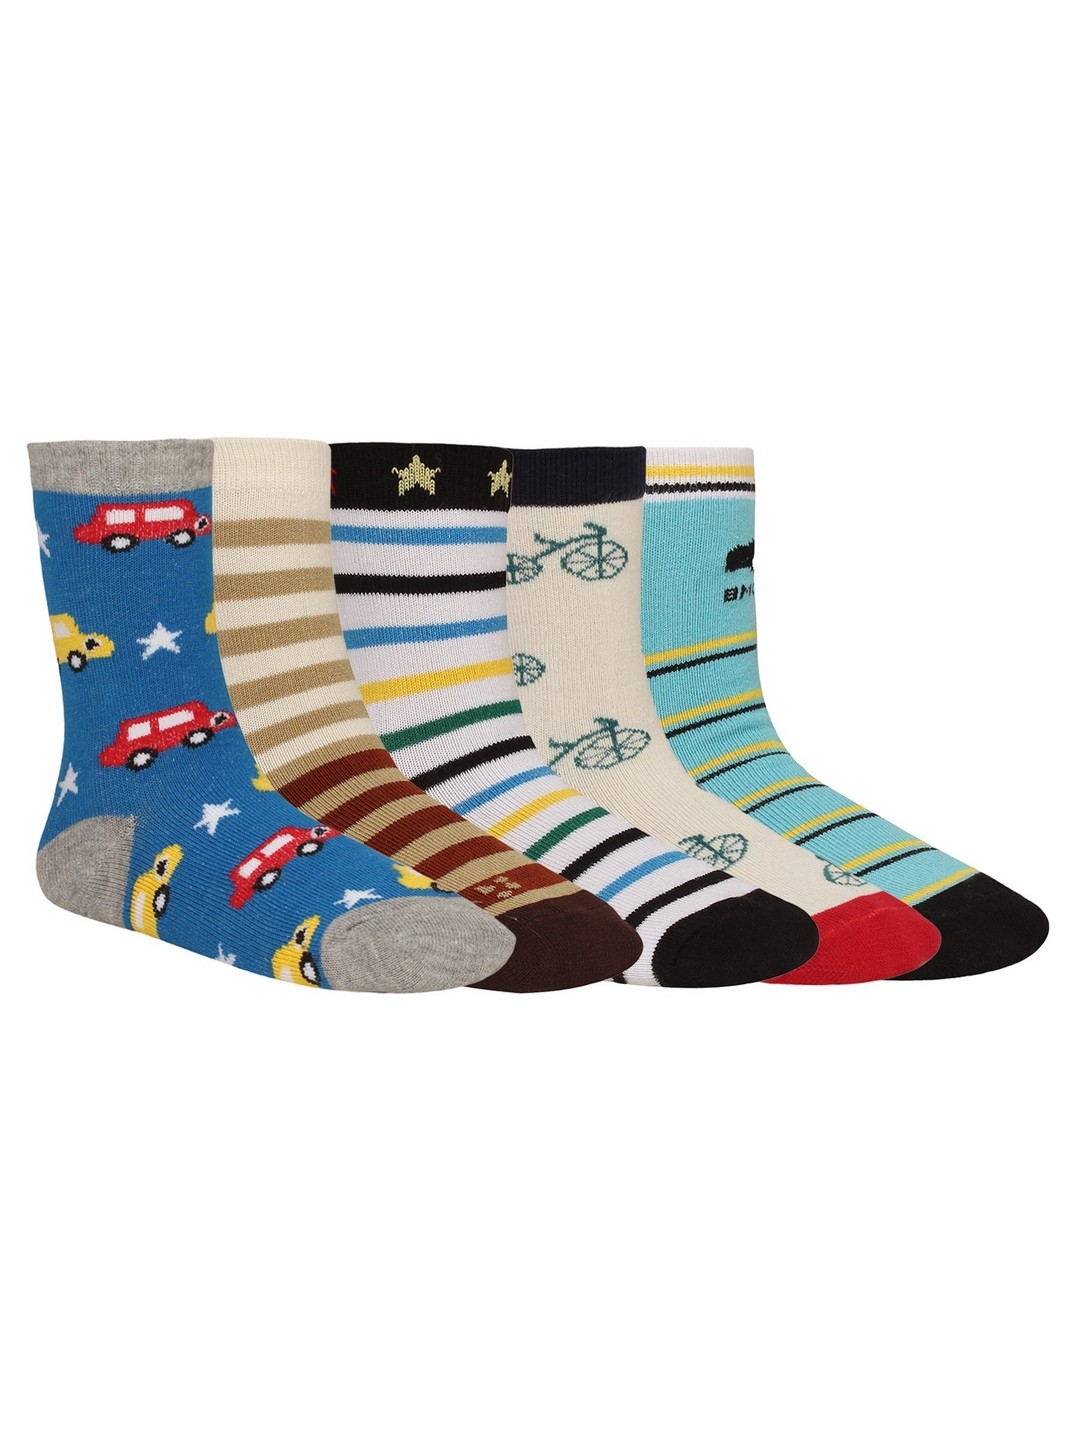 CREATURE | Creature Printed Multicolored Cotton Socks for Kids - Combo Pack of 5